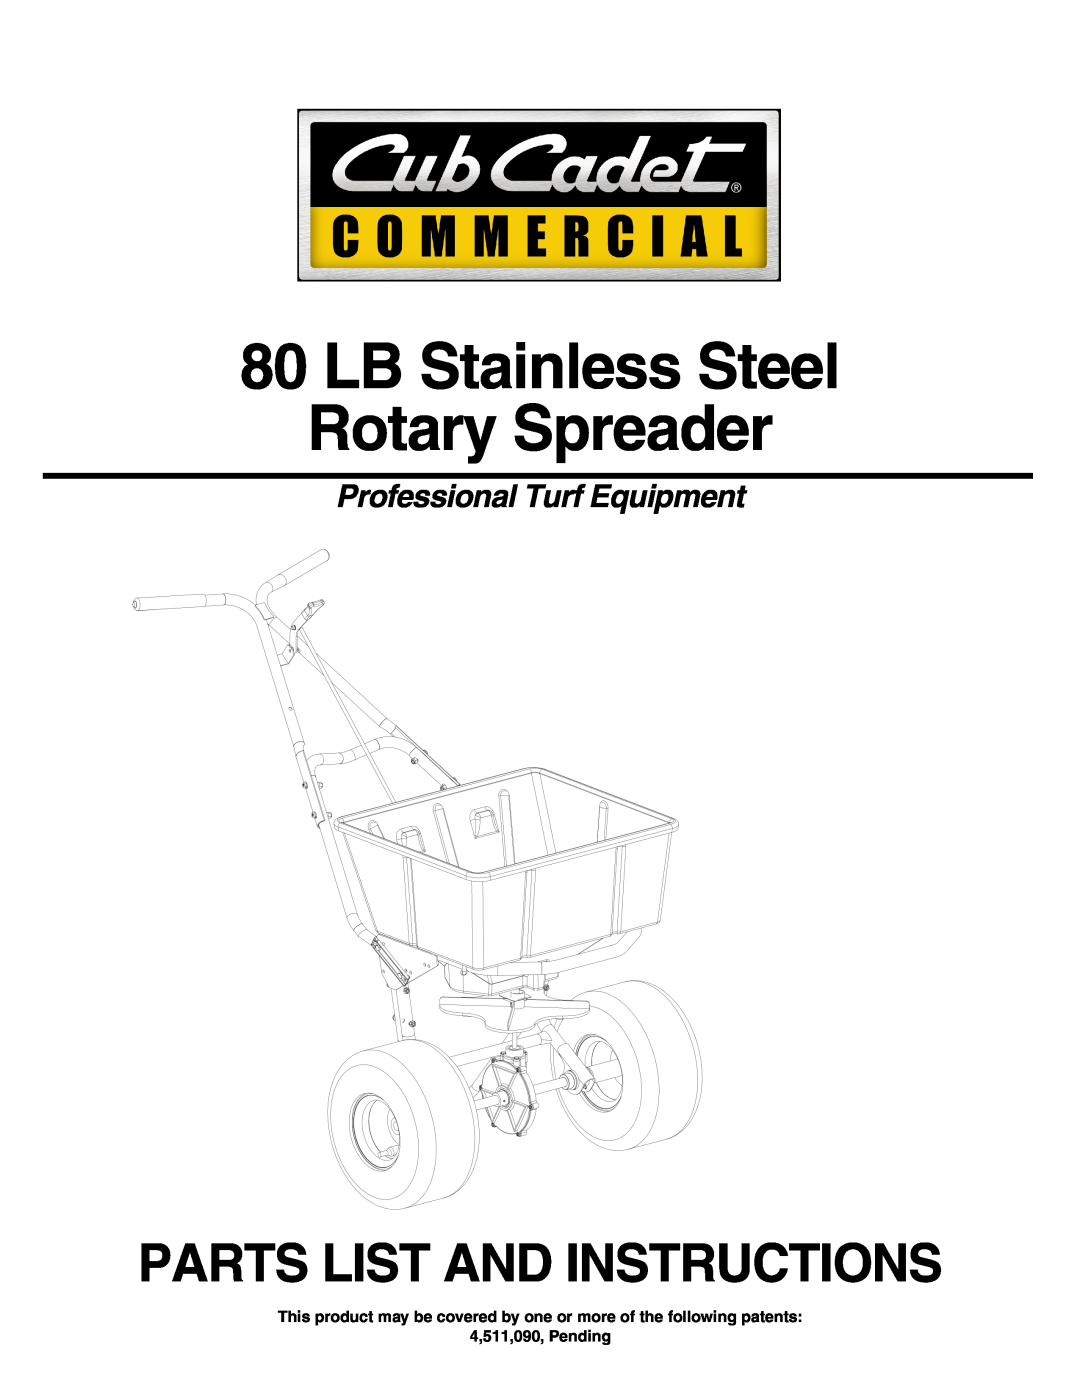 Cub Cadet 80 LB manual LB Stainless Steel Rotary Spreader, Parts List And Instructions, Professional Turf Equipment 